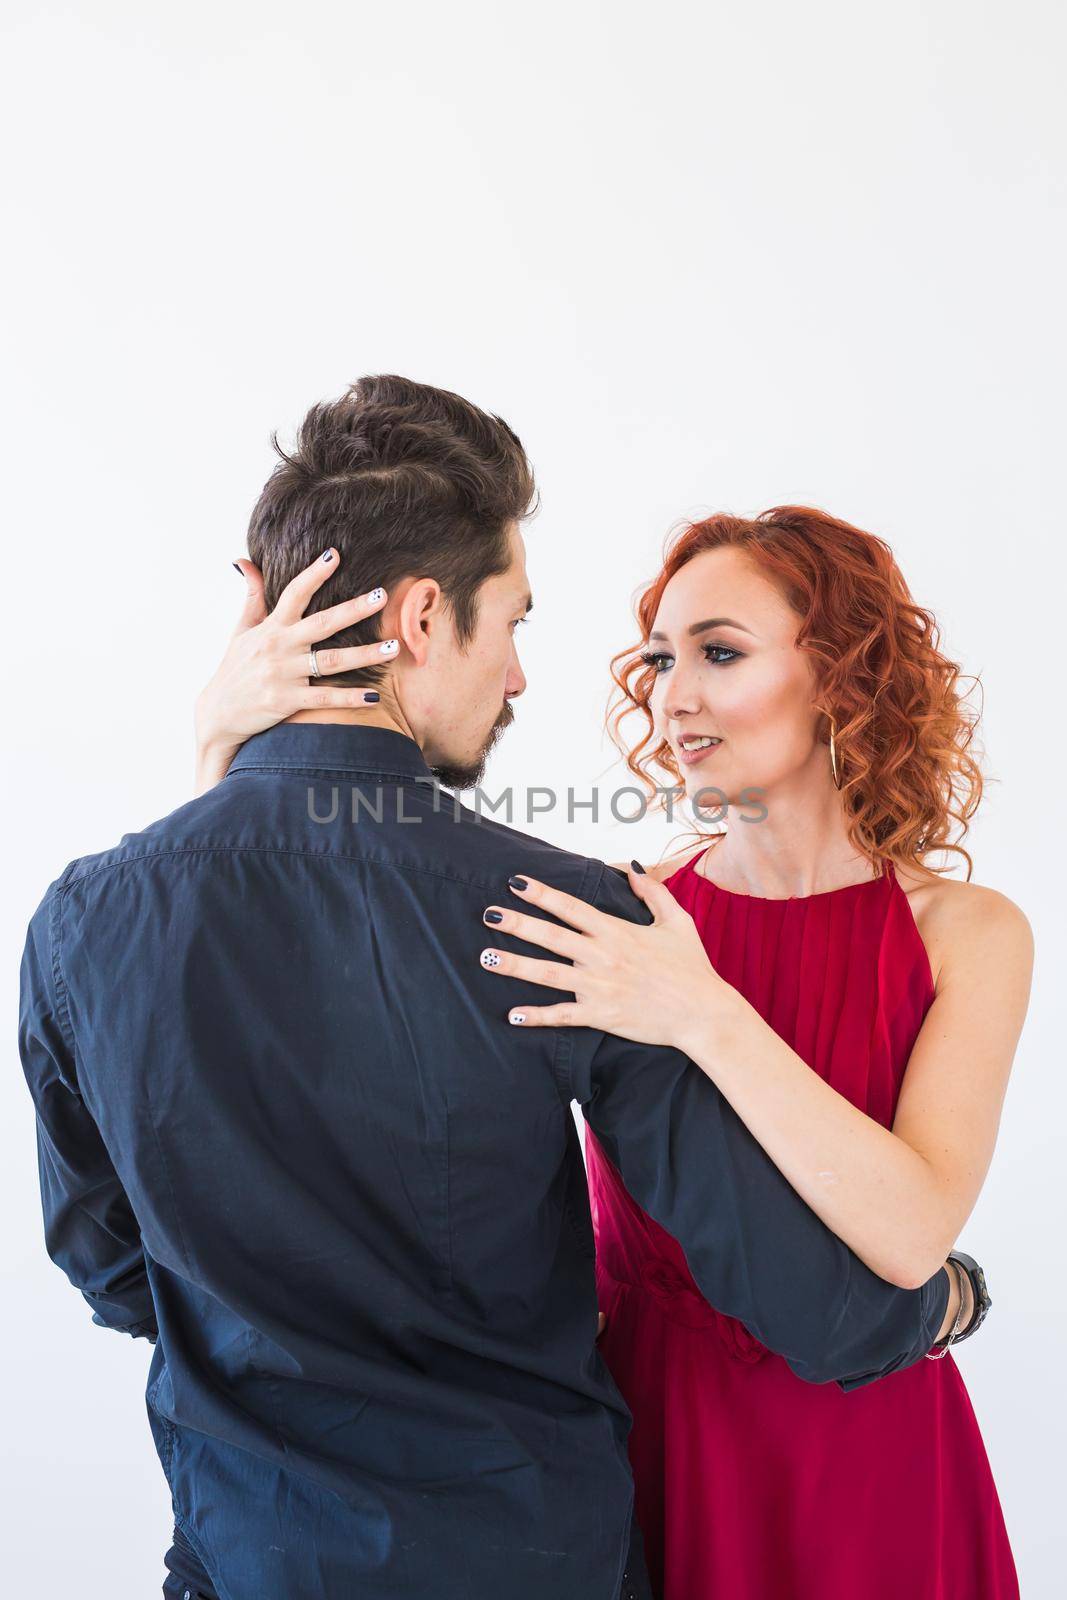 Social dance, bachata, kizomba, salsa, tango concept - Close up portrait of woman man dressed in beautiful outfits over white background by Satura86